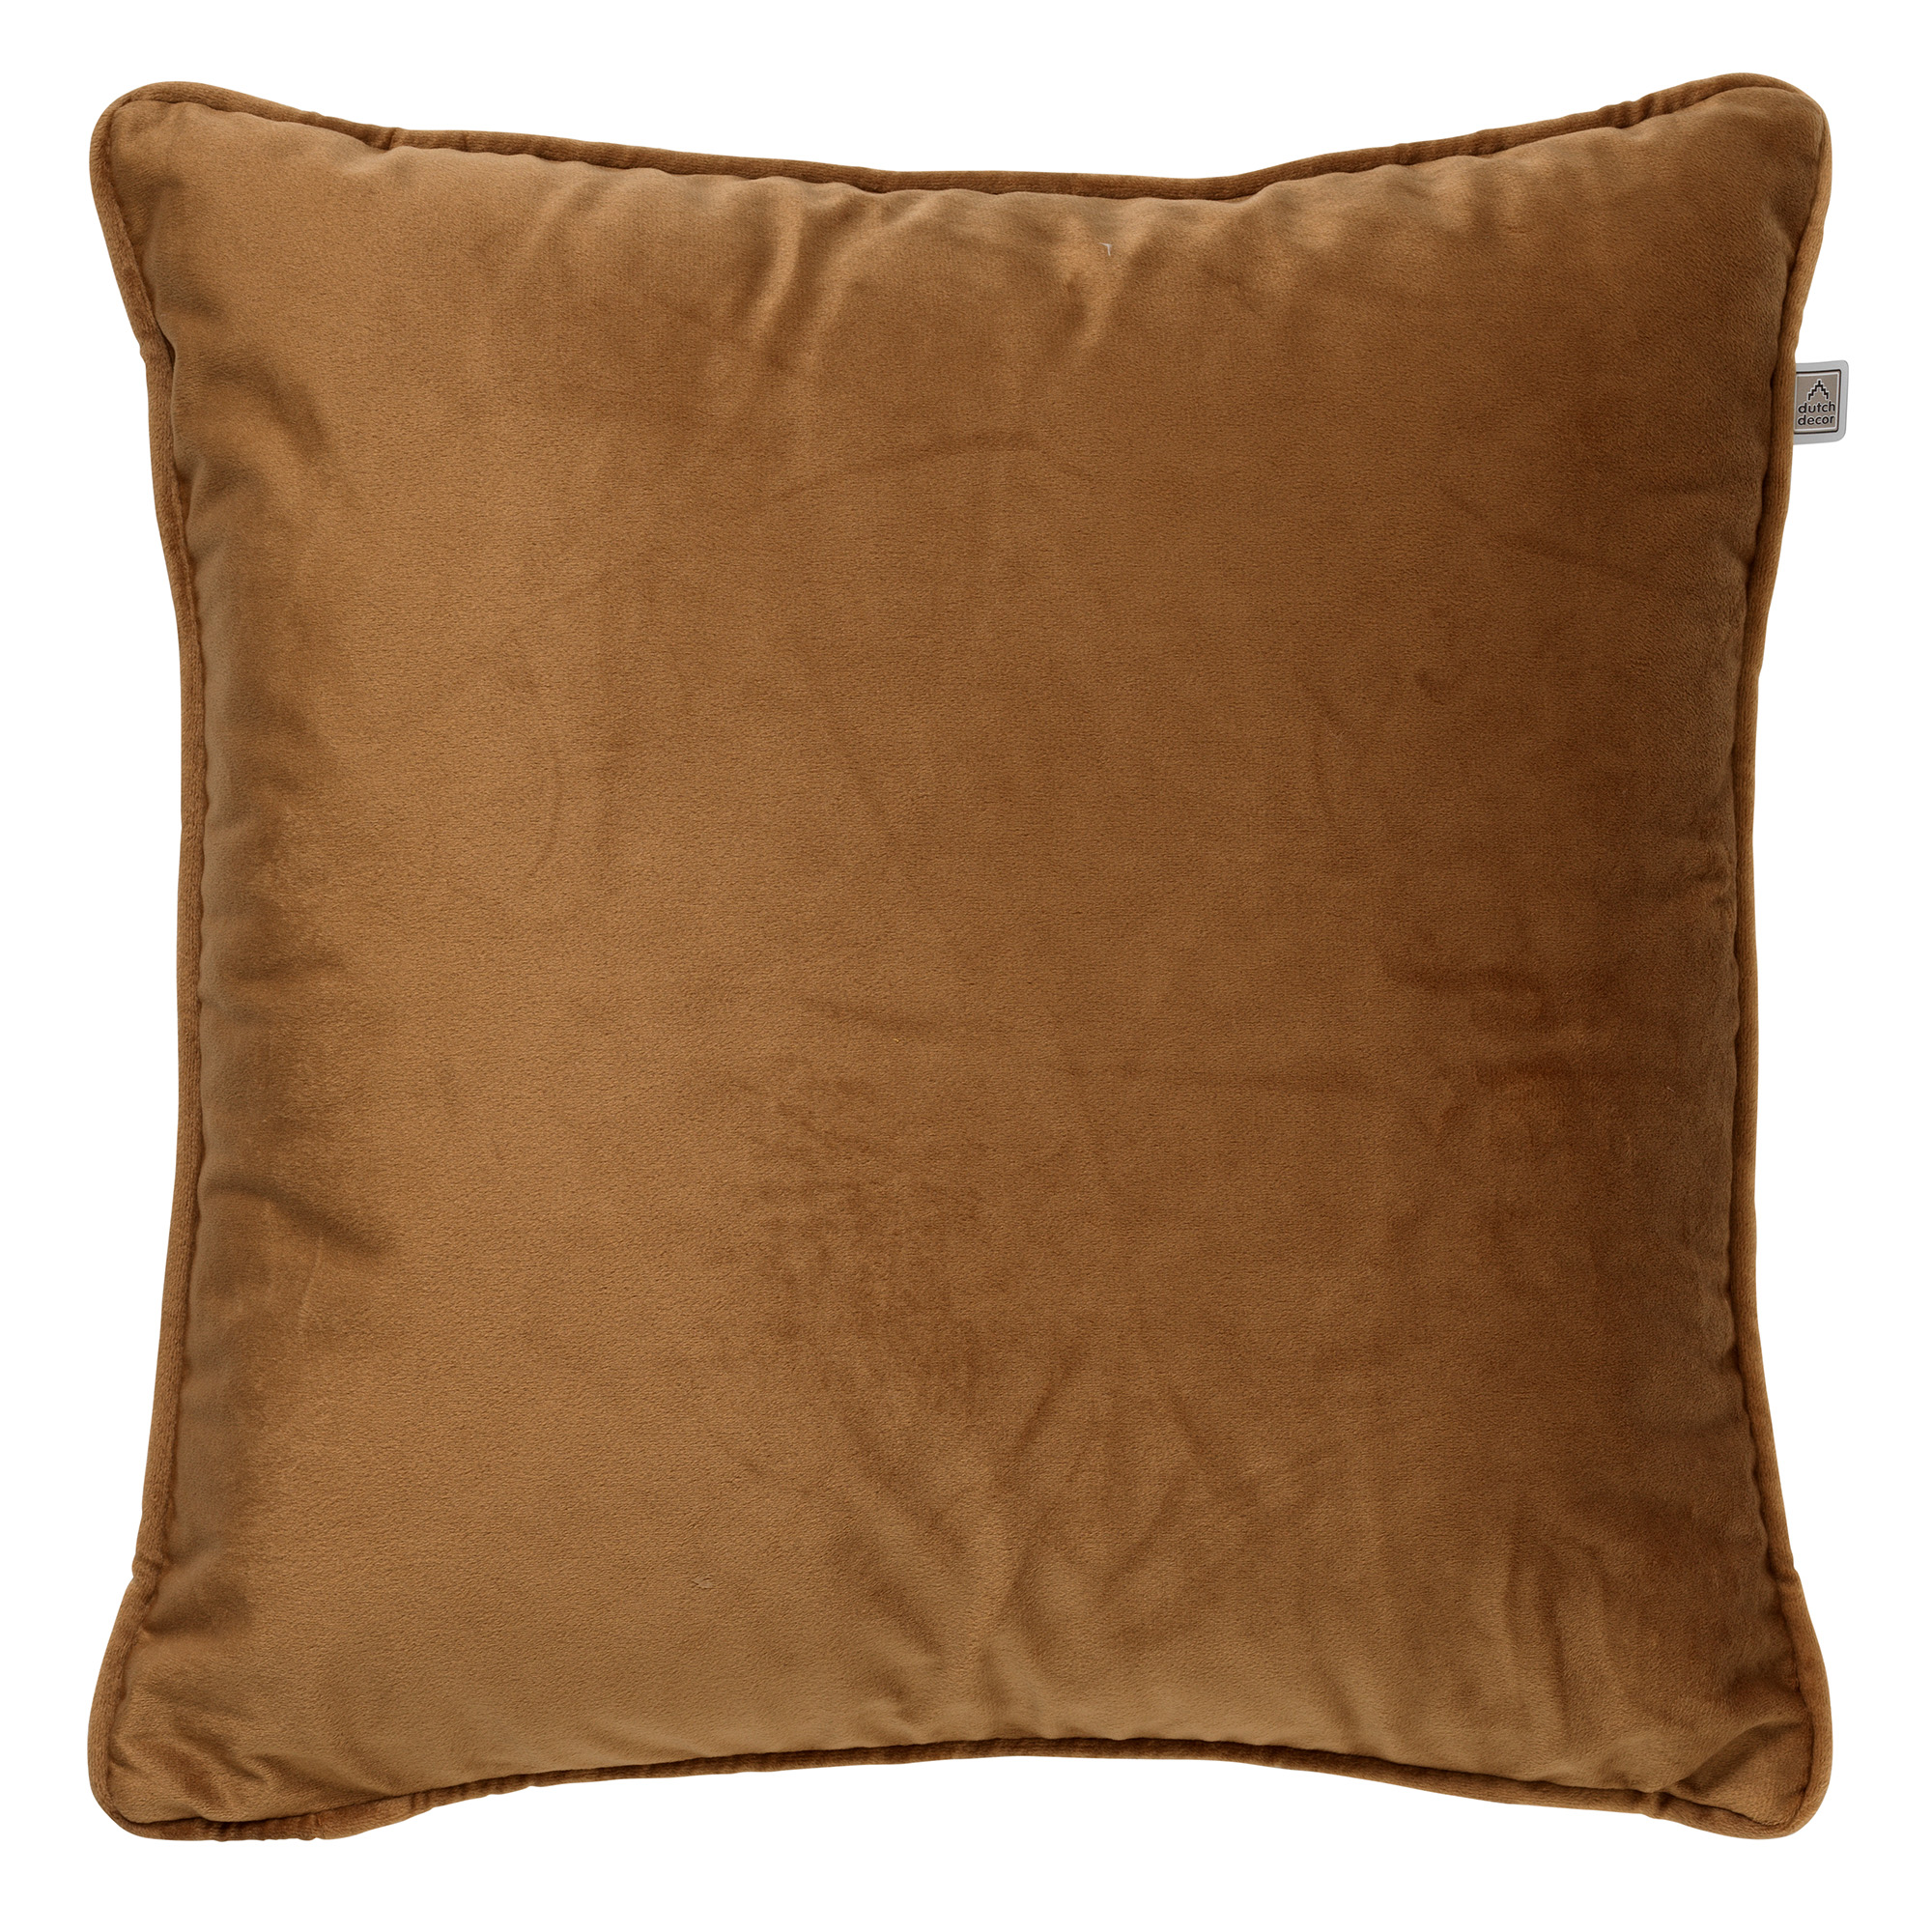 FINNA - Kussenhoes 100% gerecycled polyester - Eco Line collection 45x45 cm - Tobacco Brown - bruin